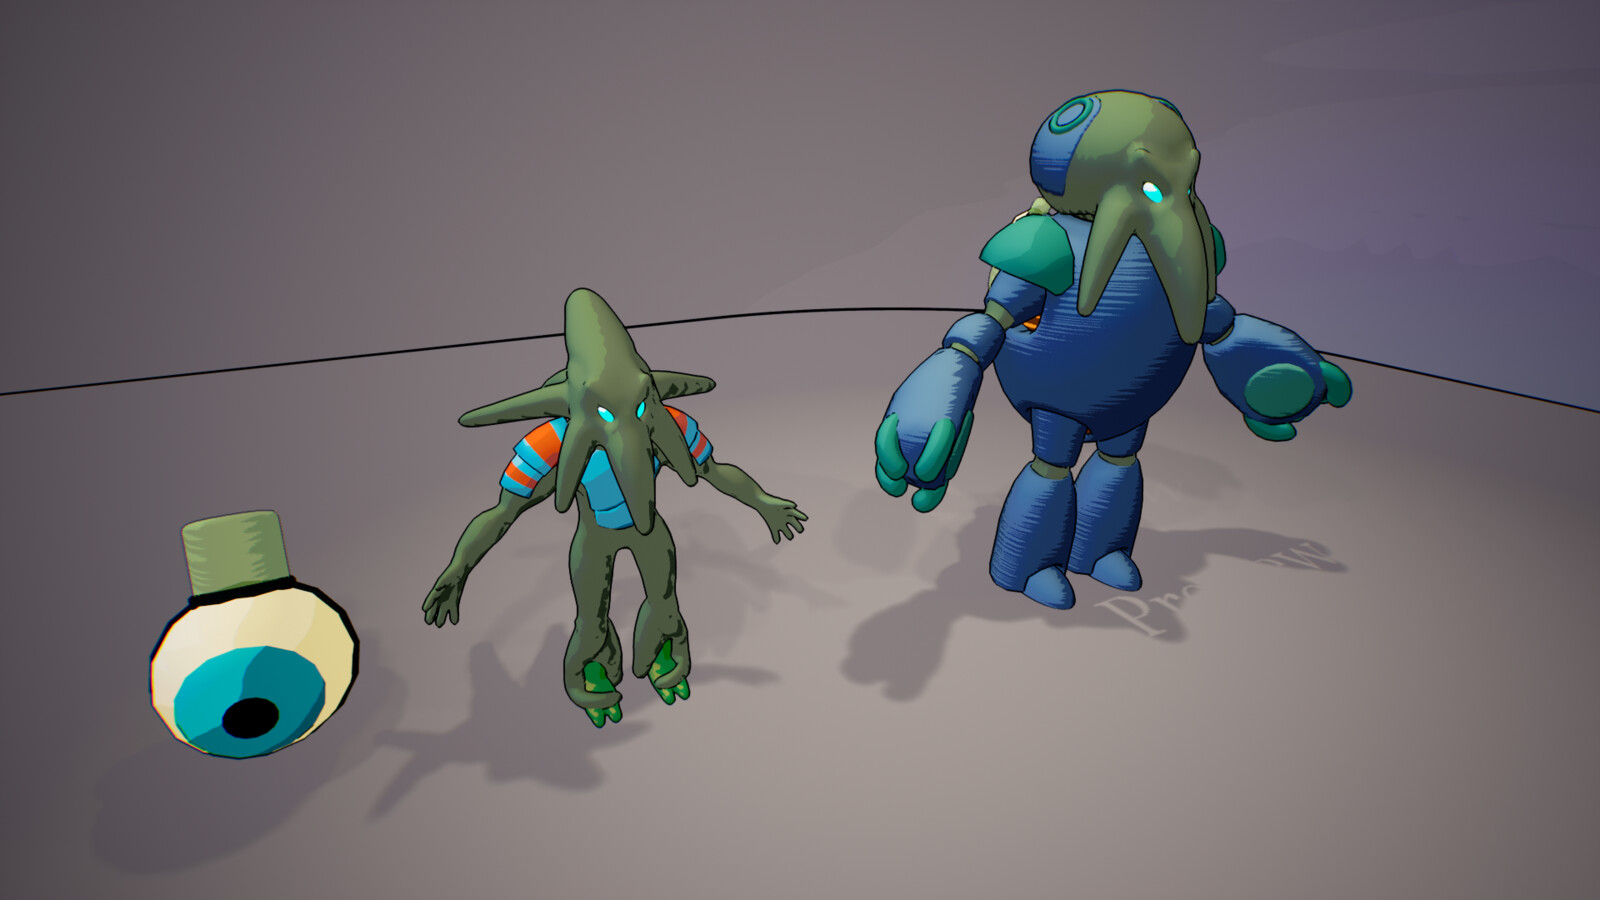 Enemy humanoid models are rigged for use by animators